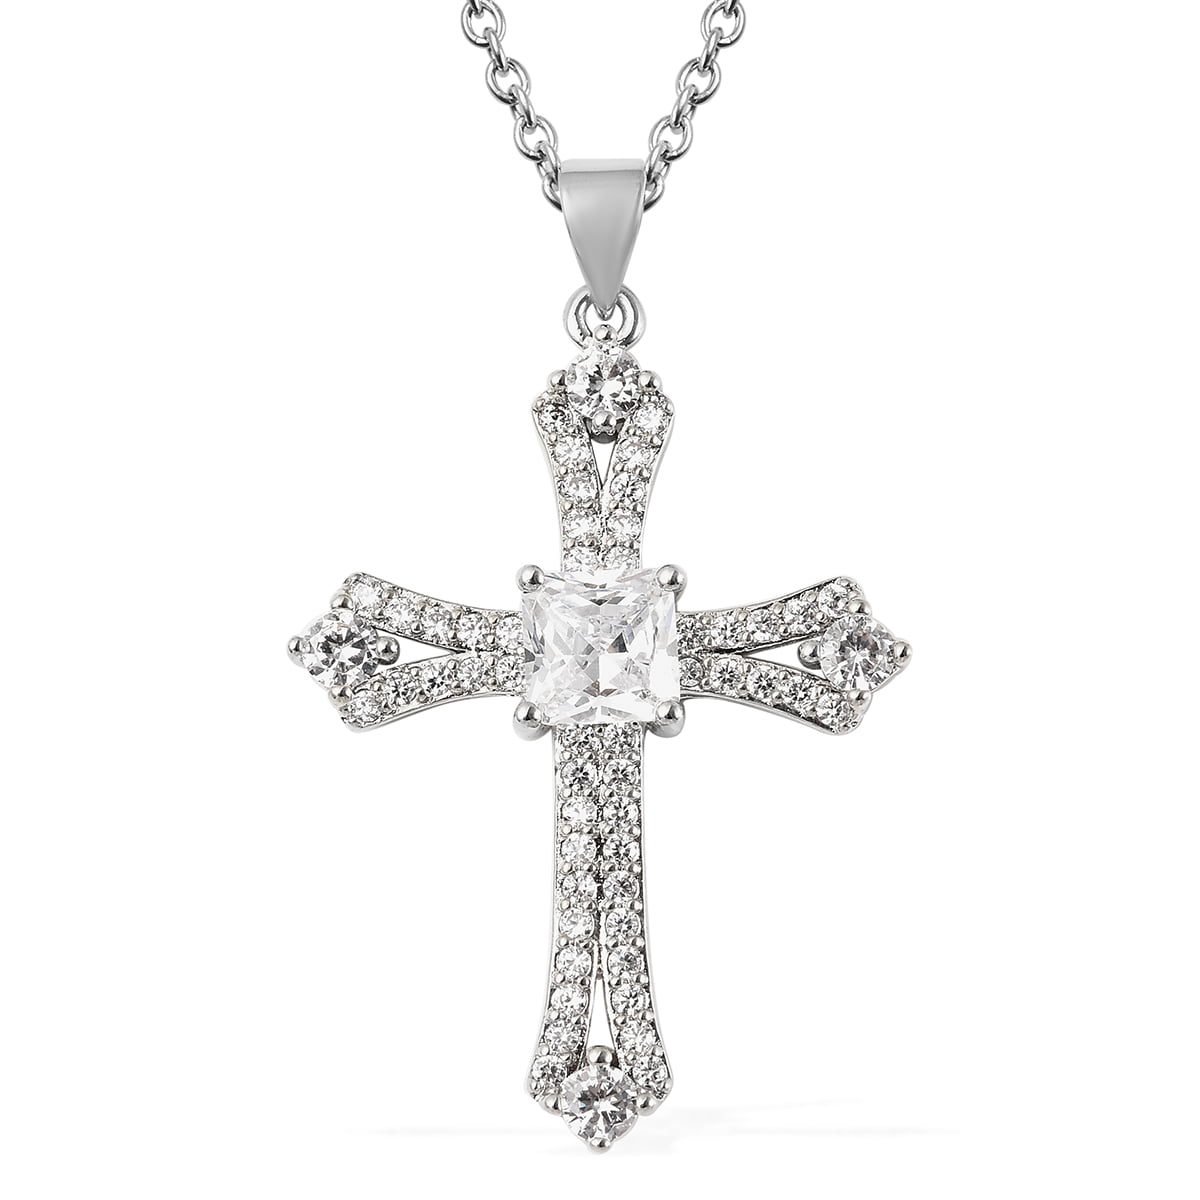 Stainless Steel Polished Cushion Religious Faith Cross Necklace 24 Inch Jewelry Gifts for Women